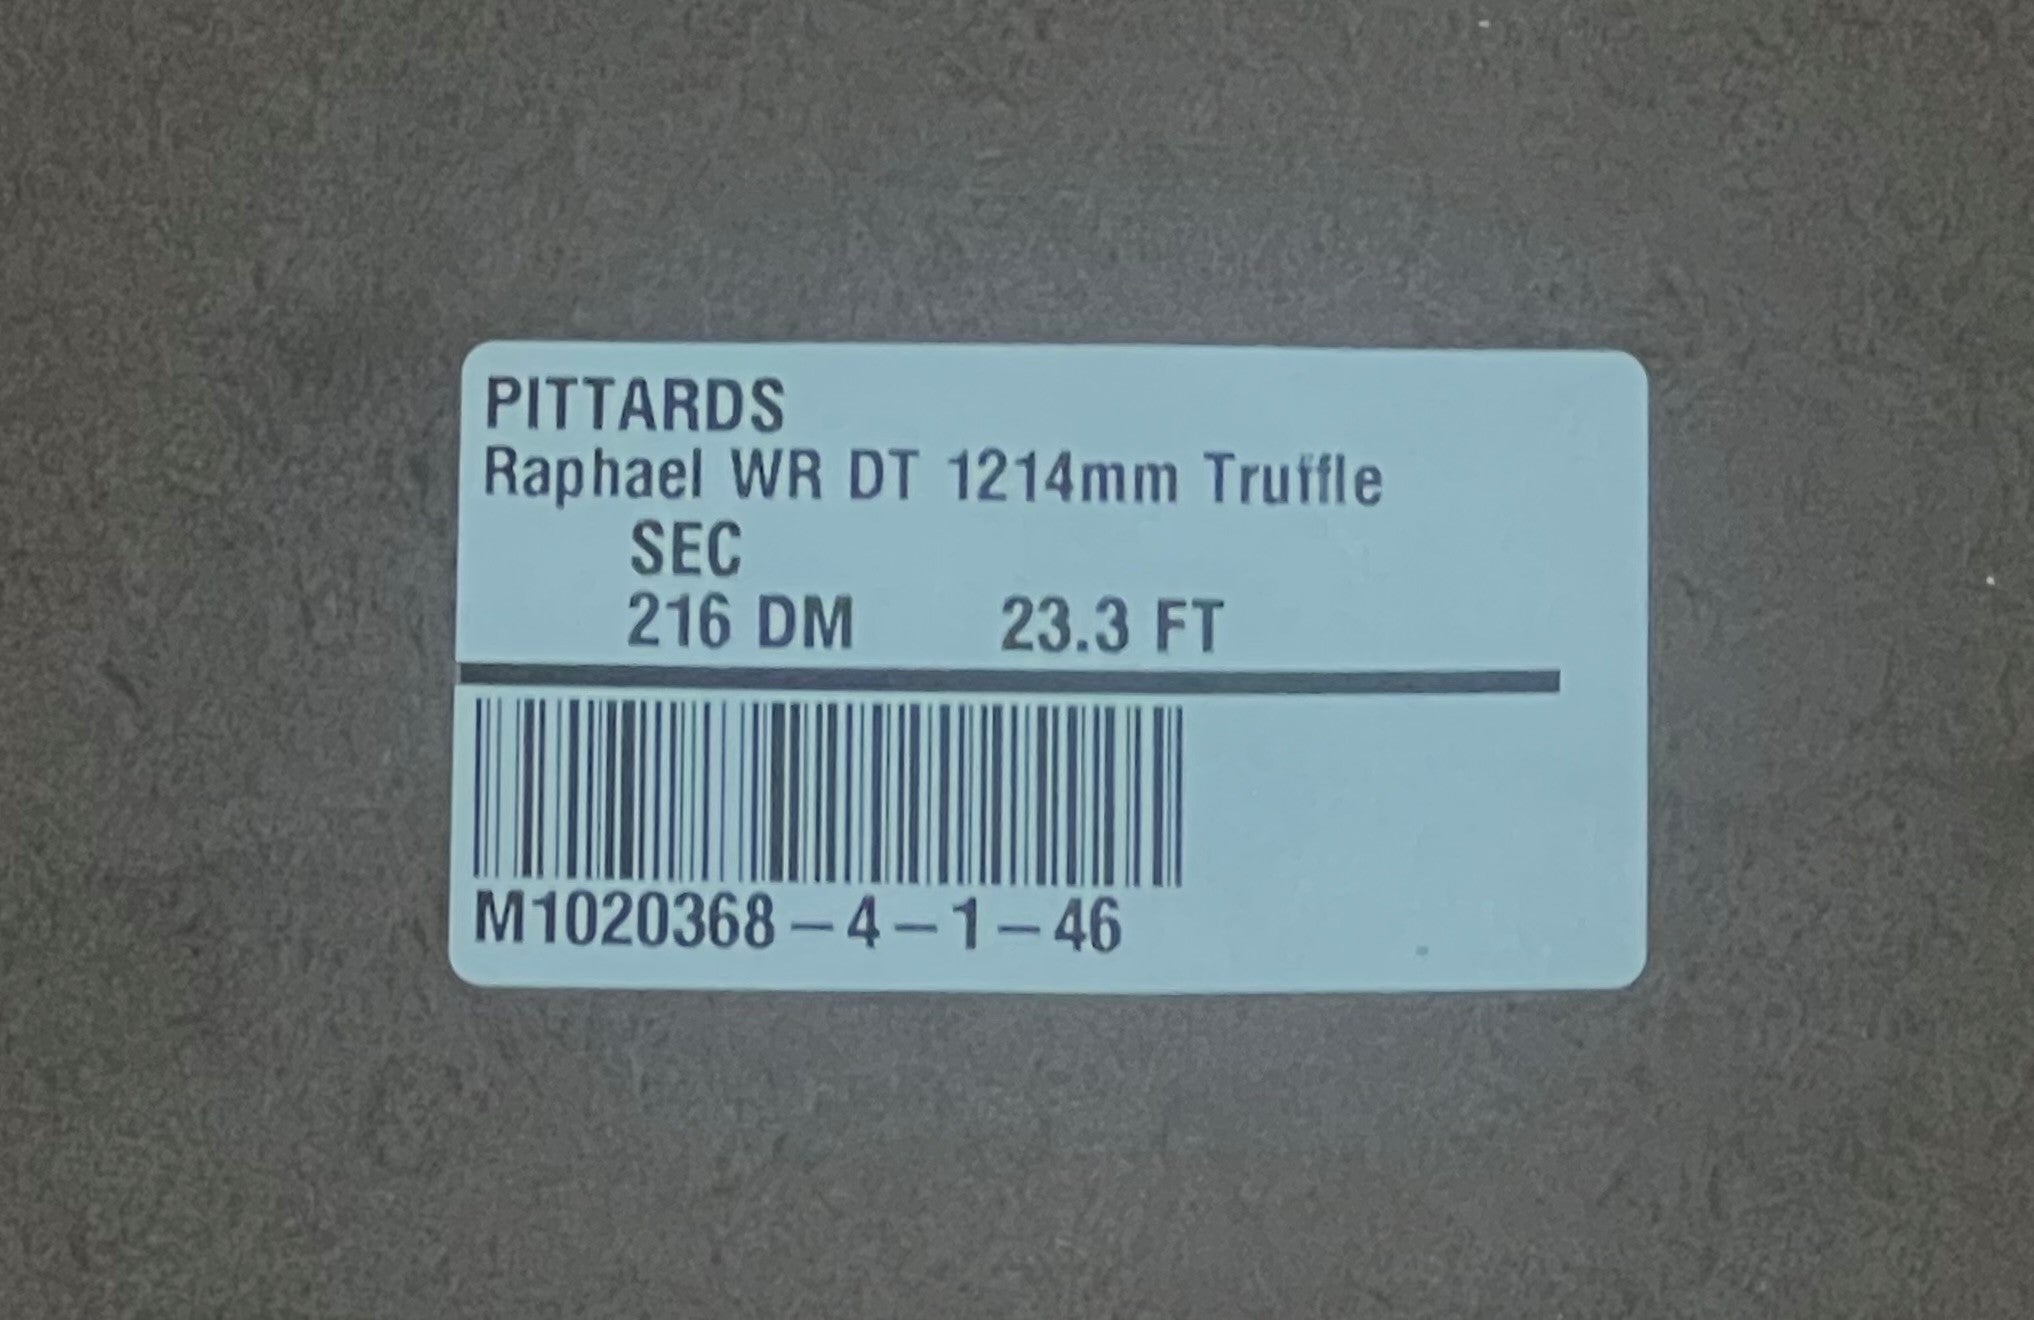 Raphael Truffle : Leather Cow Side with Smooth Grain, 1.4-1.6mm (Ex Pittards Stock)